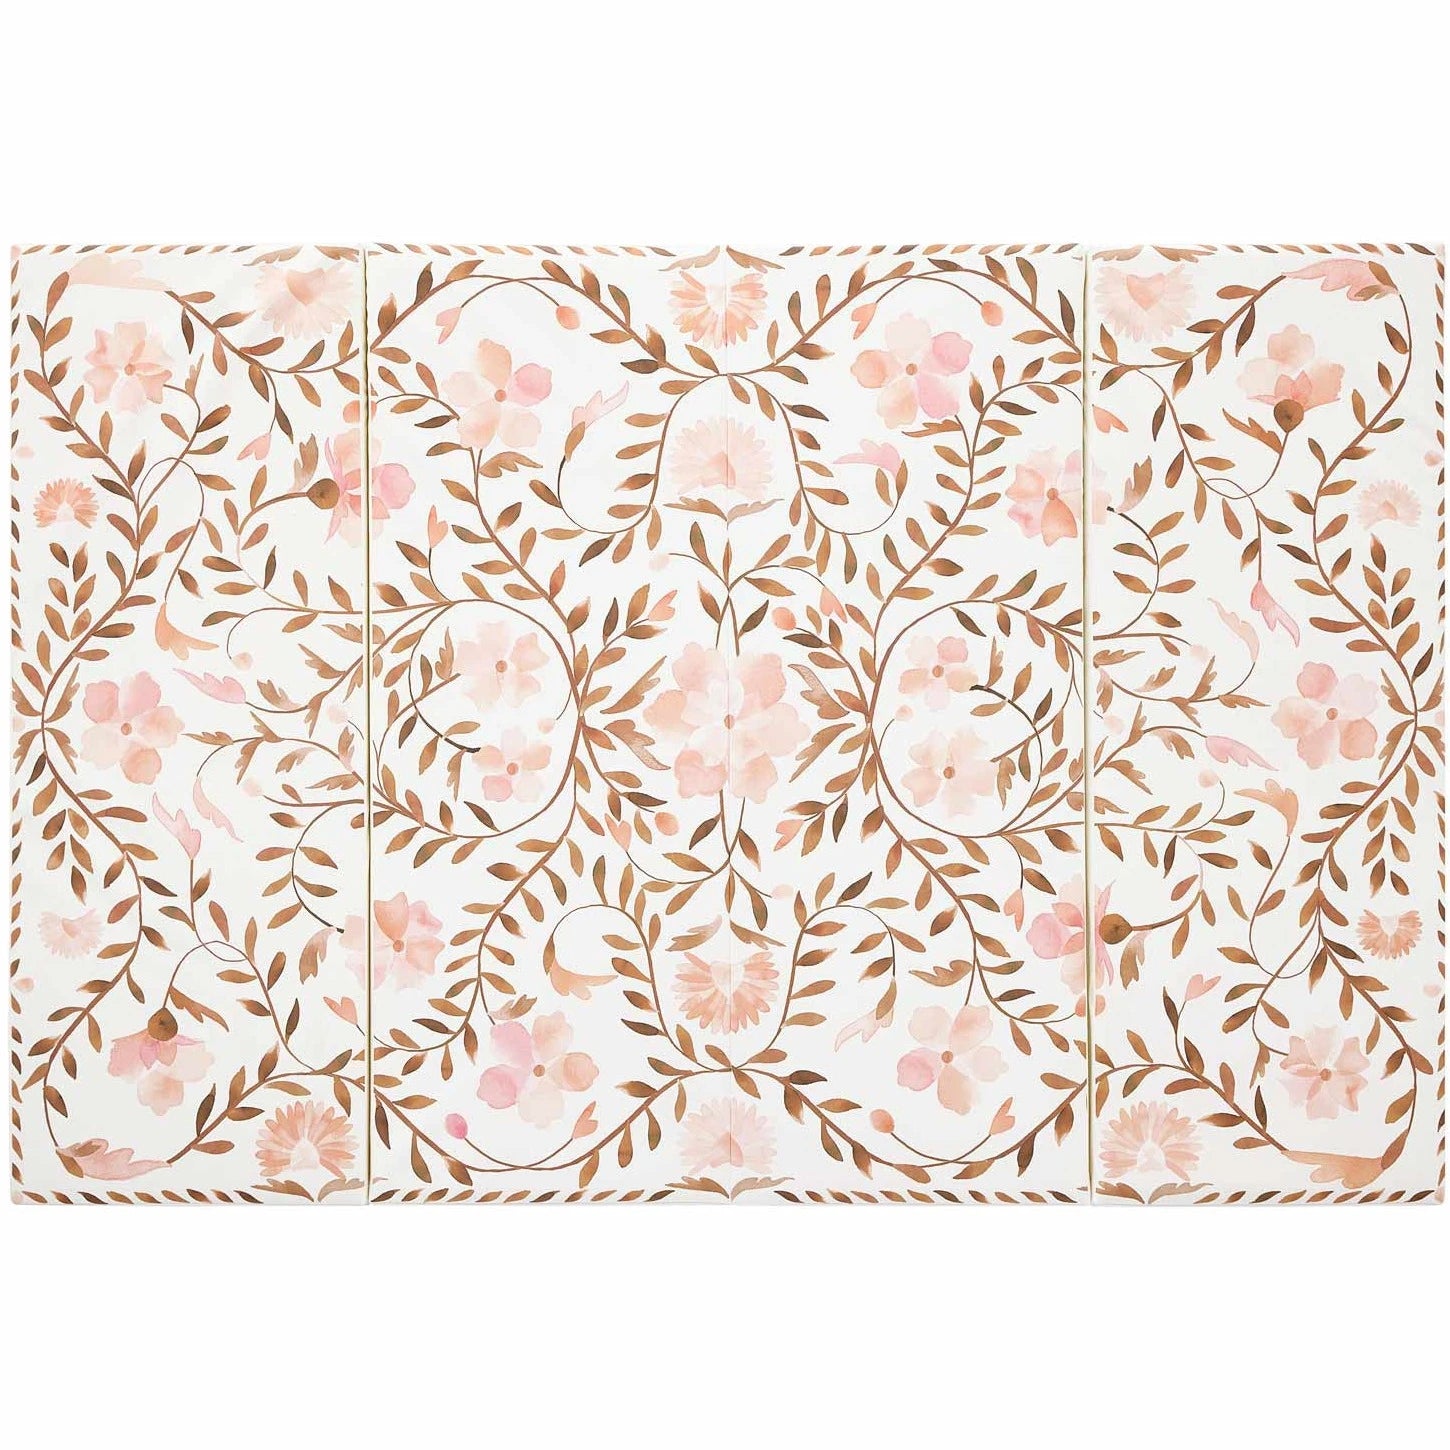 Overhead image of size 4x6 Faye Apricot pink and brown floral print tumbling mat